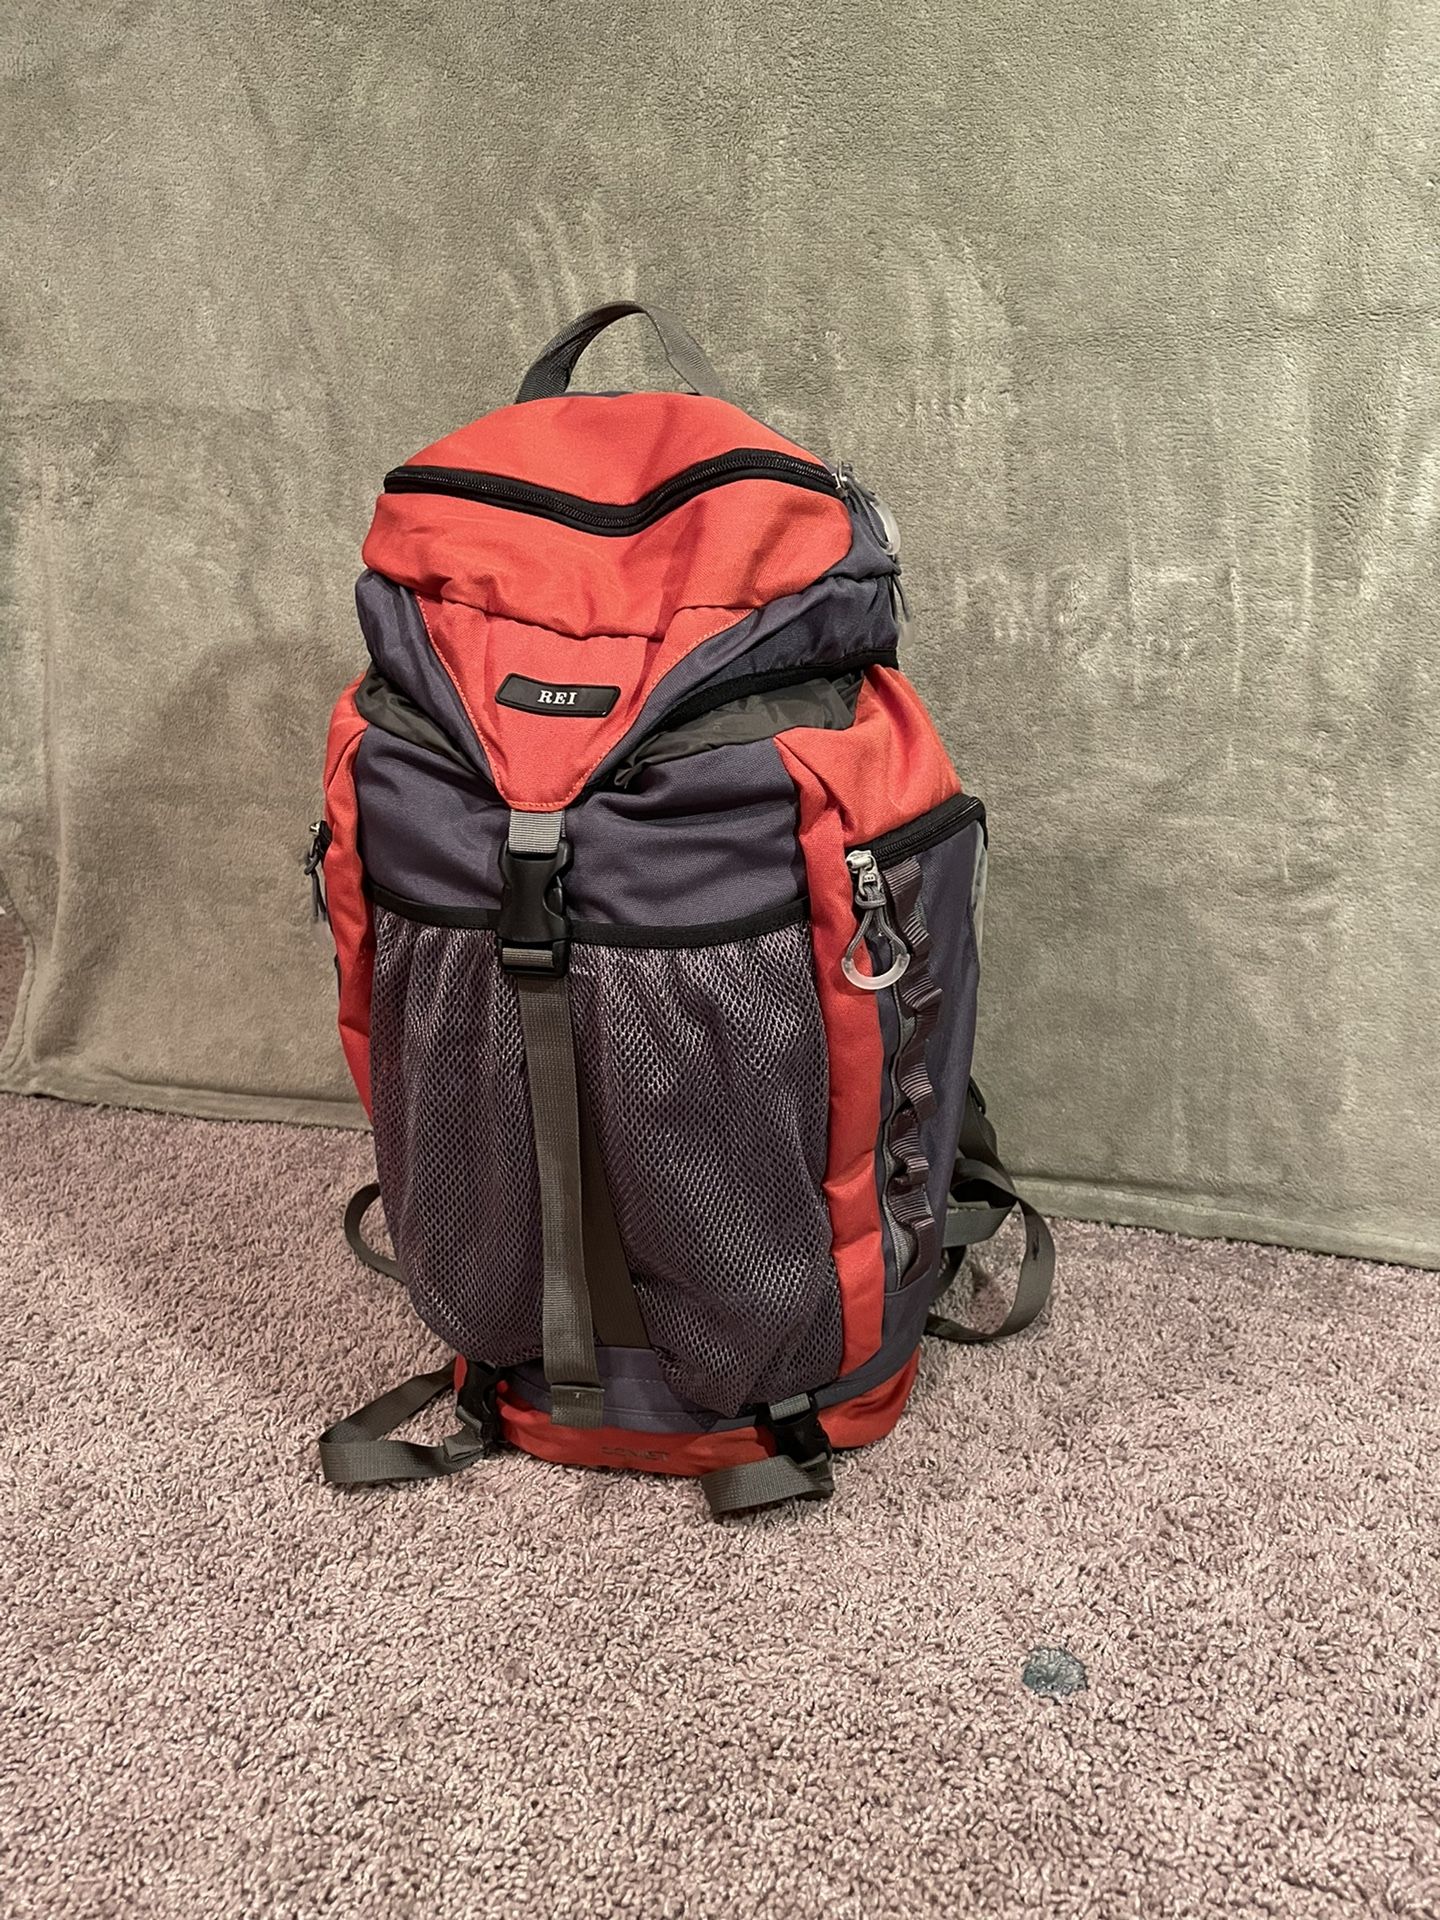 Kids Backpacking Pack